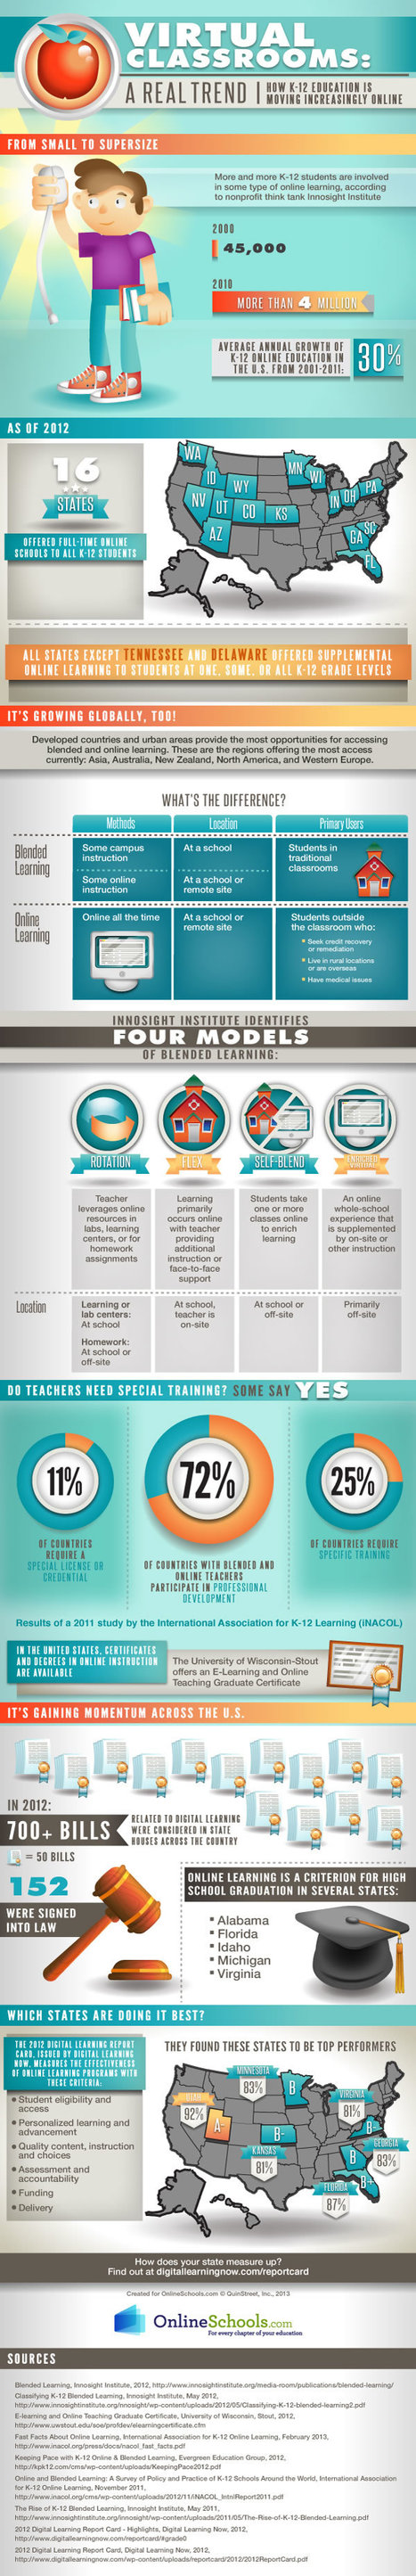 The Teacher's Quick Guide To Blended Learning [Infographic] | Education 2.0 & 3.0 | Scoop.it